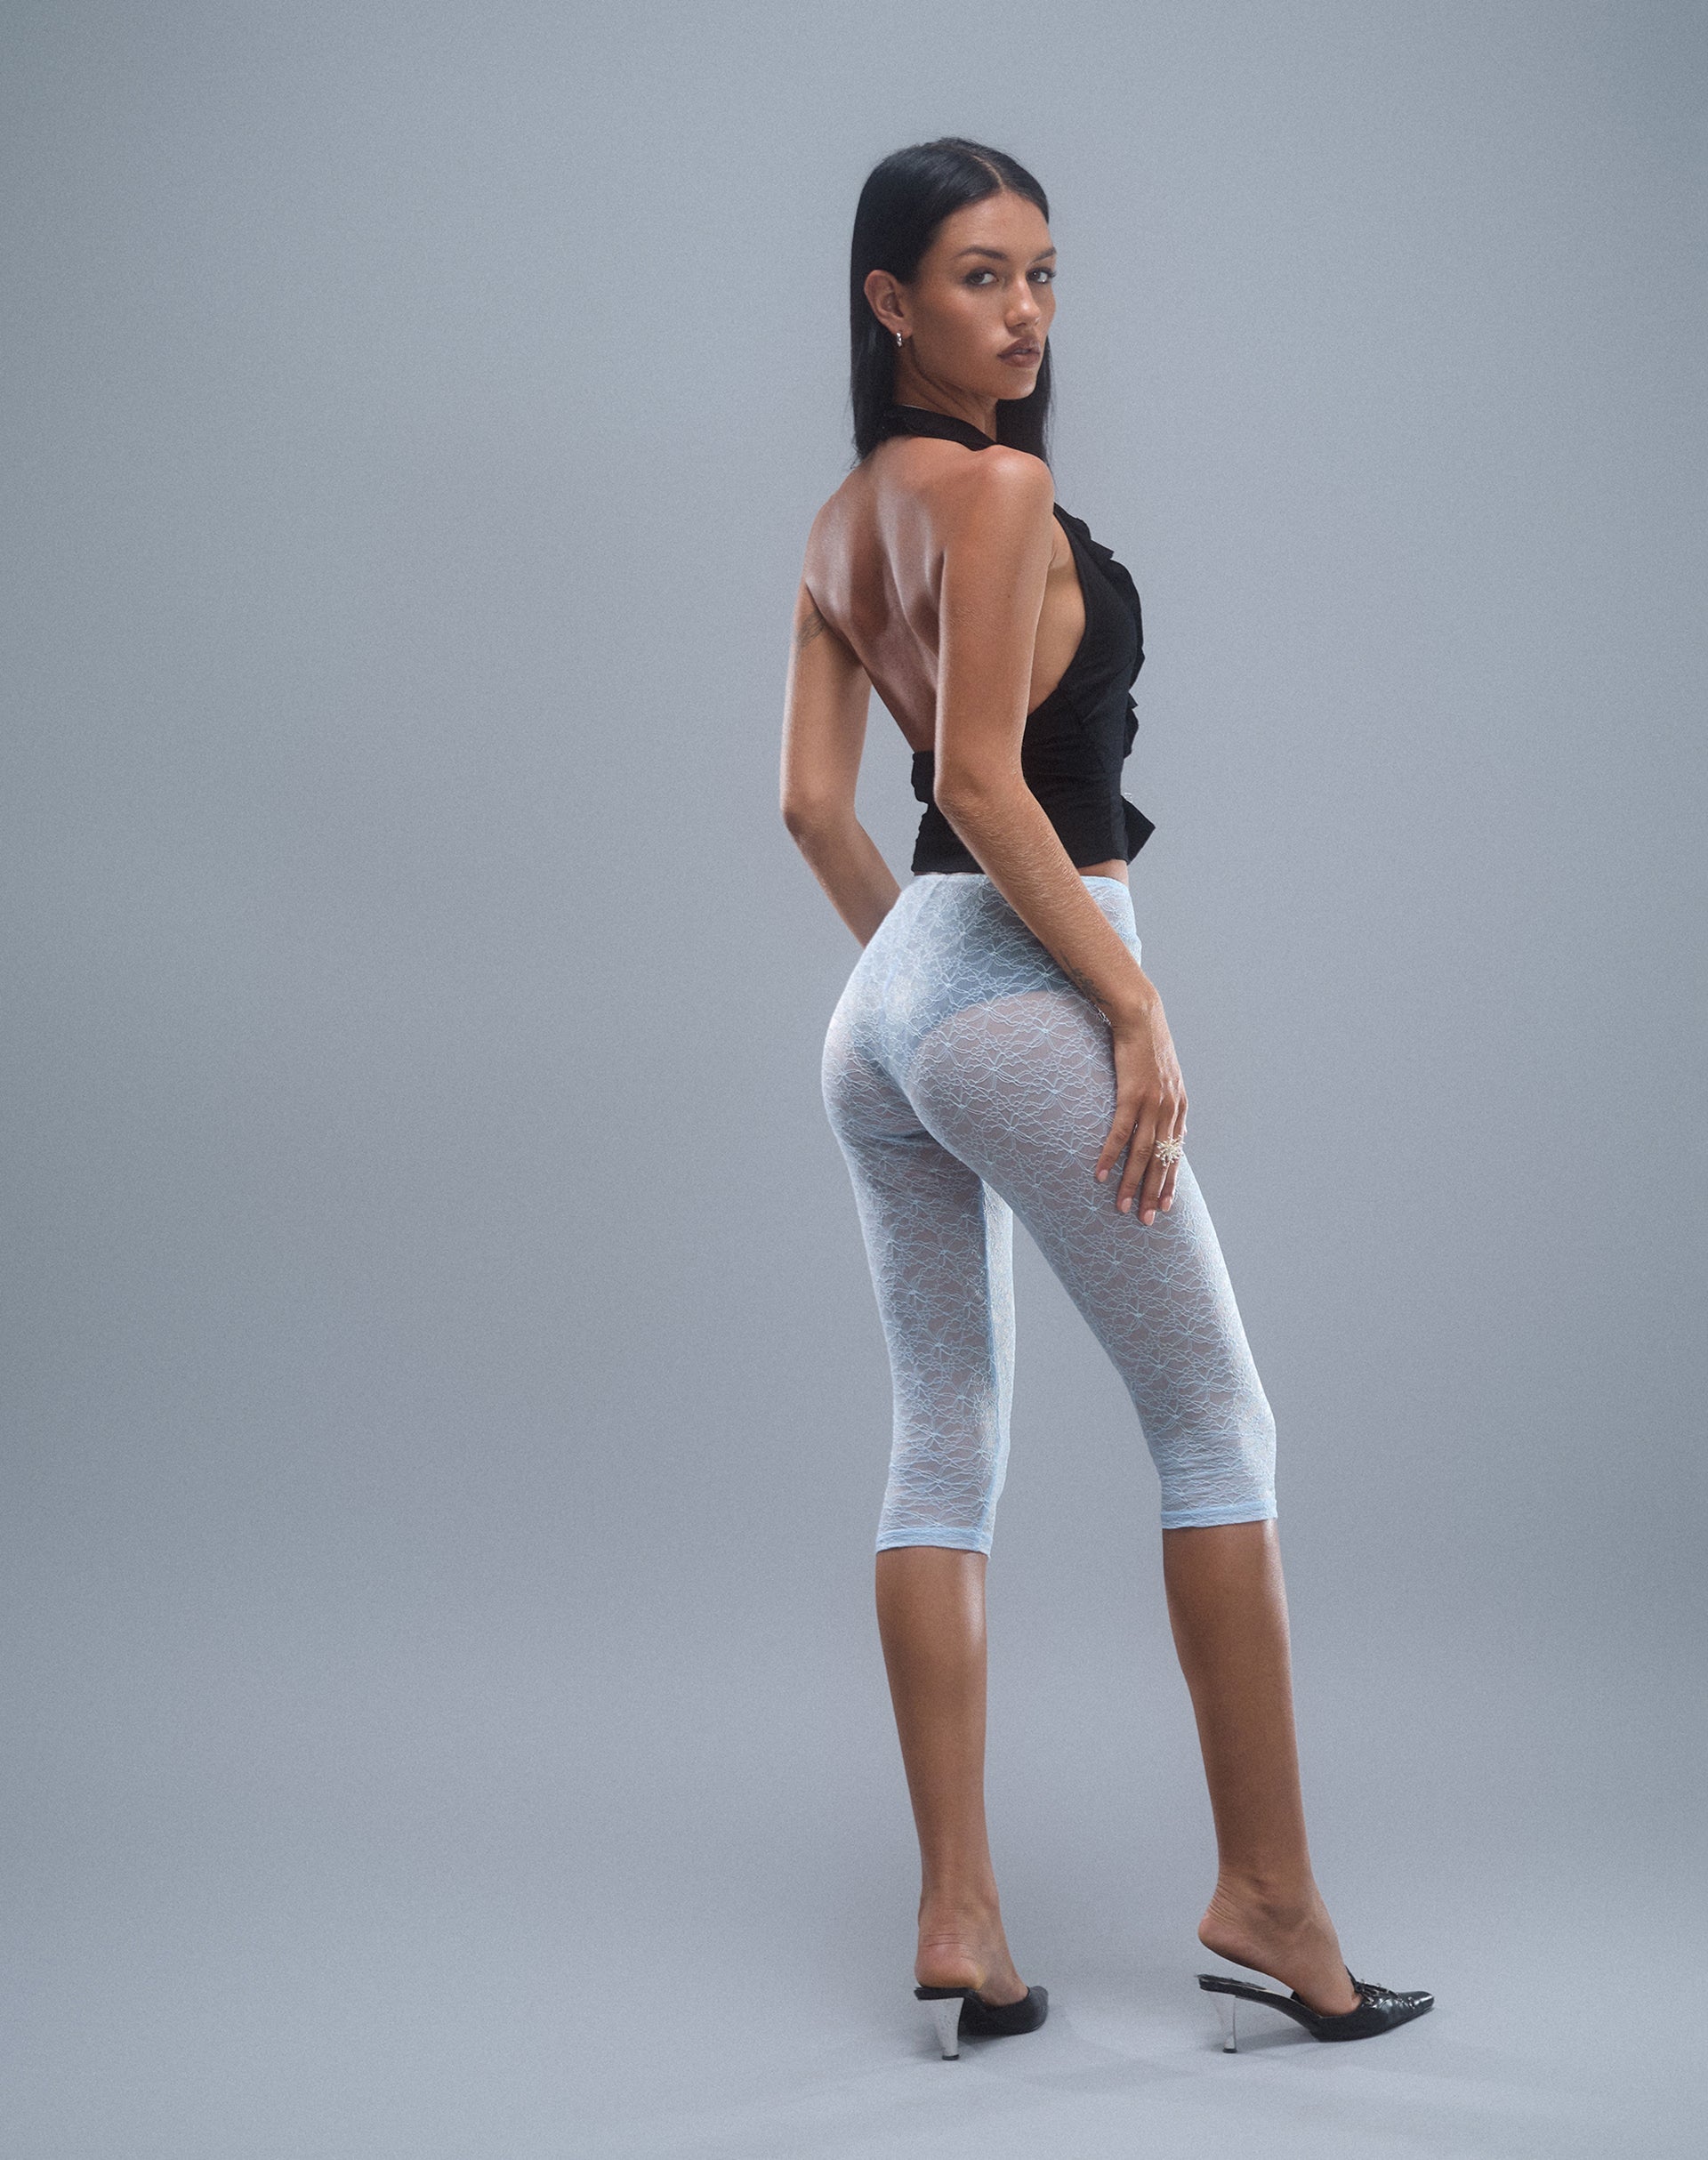 Image of Kalima Lace Cropped Capri Trouser in Baby Blue